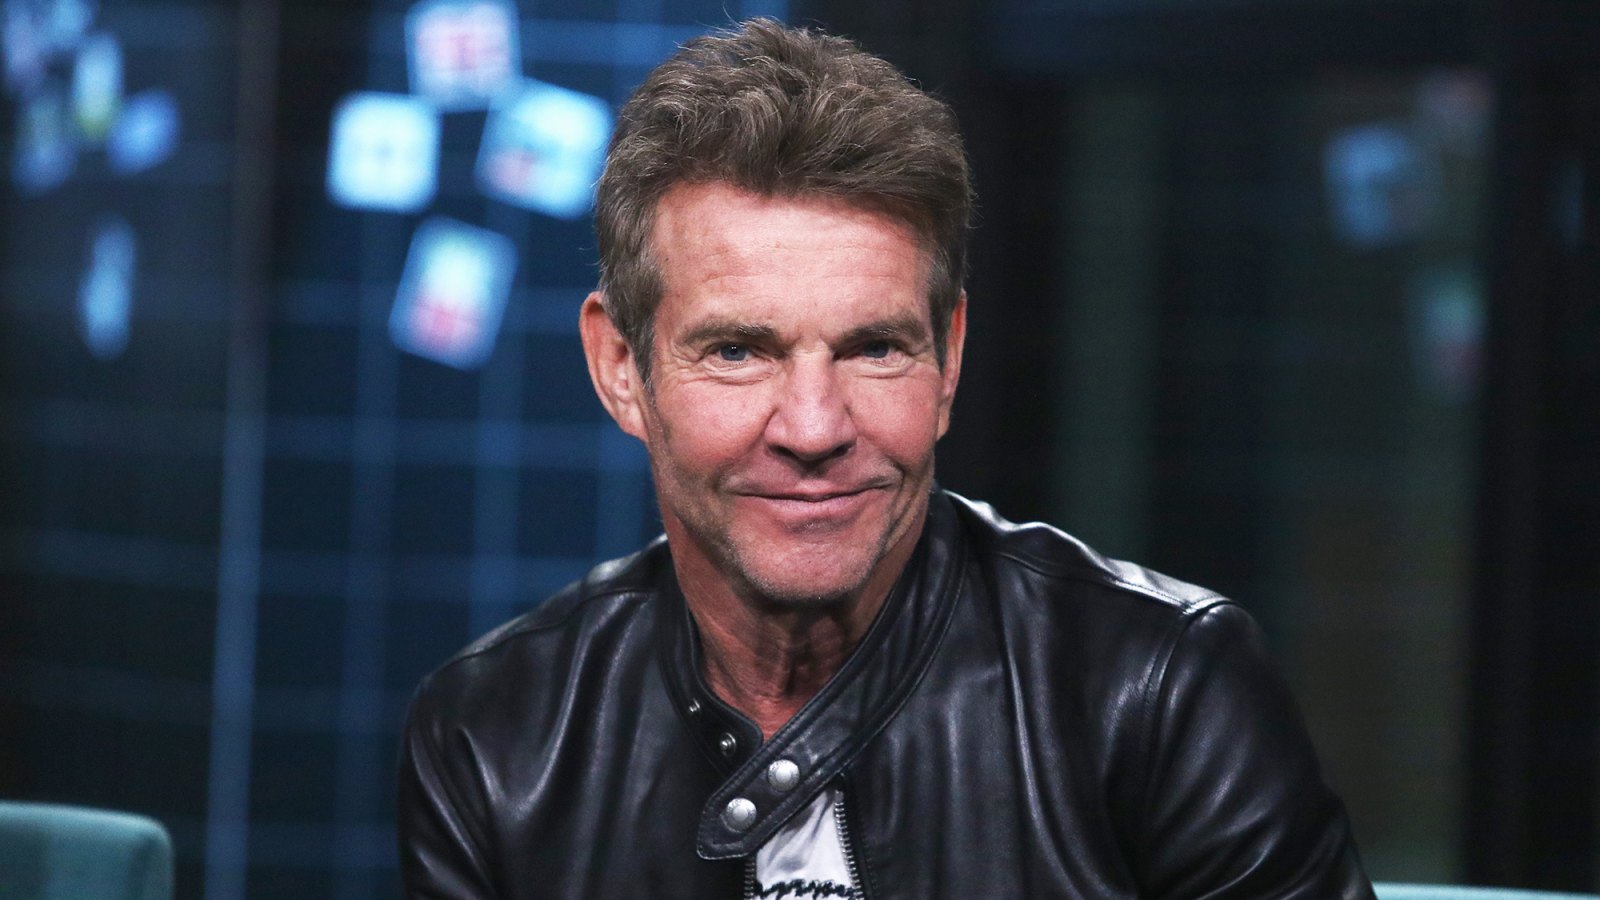 Dennis Quaid Talks Possibility of Getting Married Again in the Future: ‘I Never Count Anything Out’